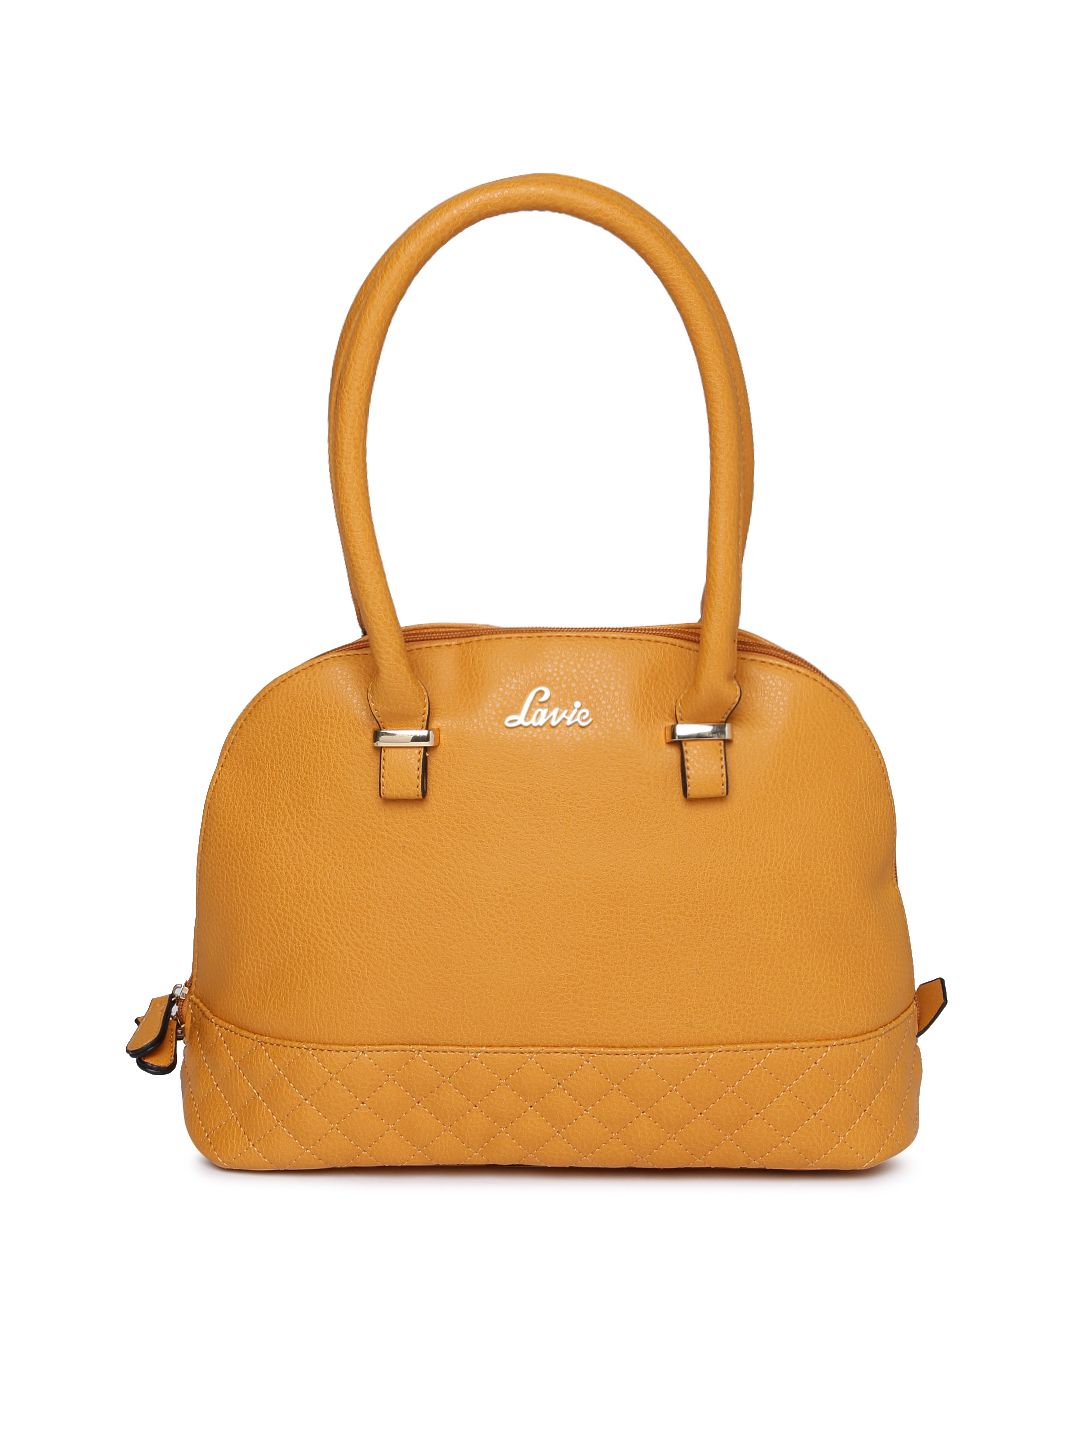 Lavie Mustard Yellow Solid Shoulder Bag Price in India